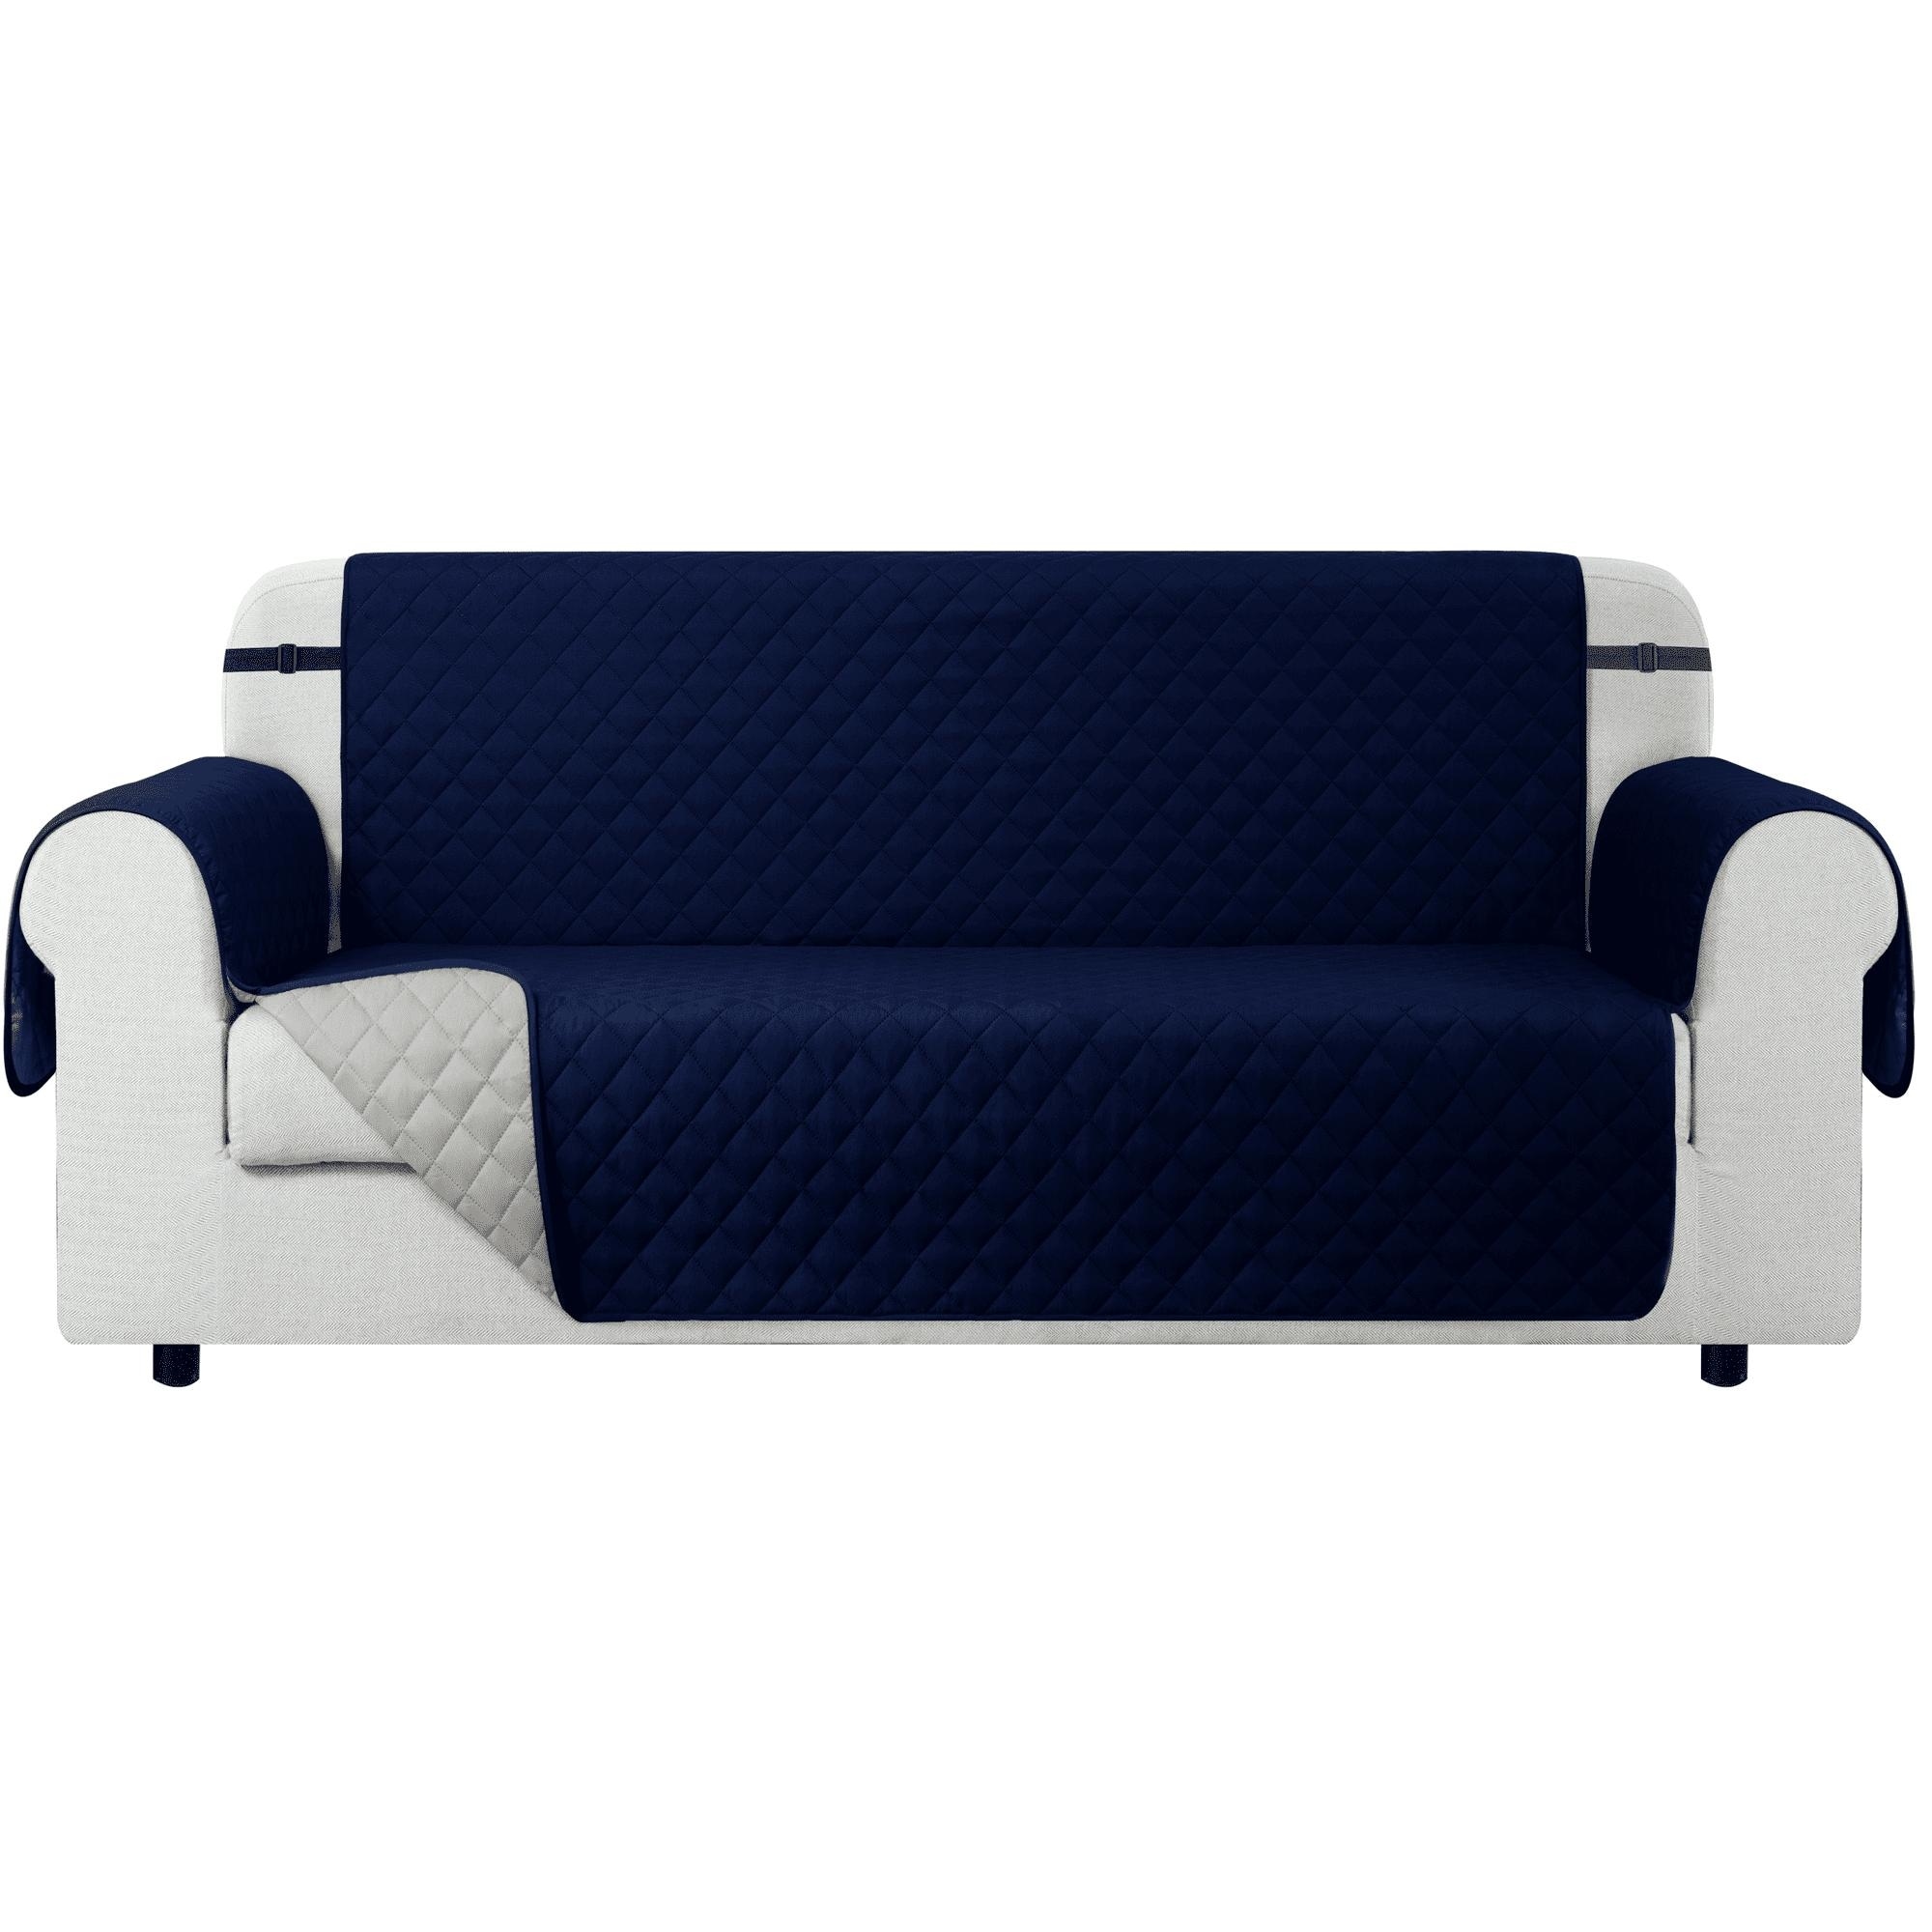 CHUN YI Loveseat Slipcover Reversible with Elastic Straps - On Sale - Bed  Bath & Beyond - 36685921